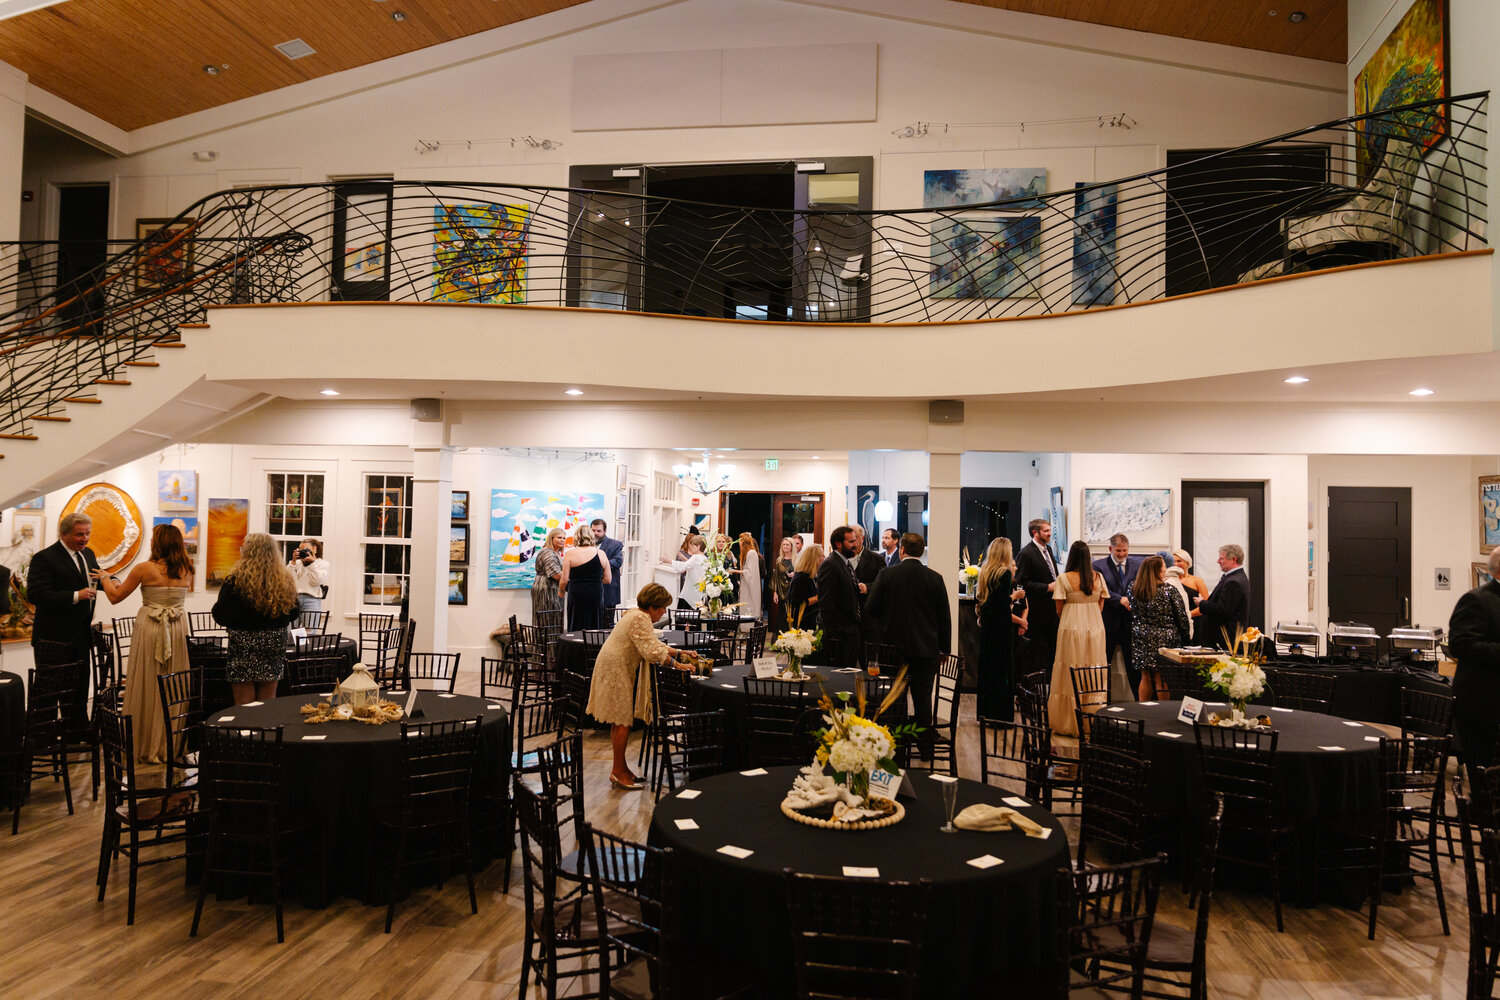 Attendees of the inaugural BCCAC Fall Ball standing inside the Coastal Arts Center on Nov. 2. The event, which brought in $31,500, was a way to raise money to support a cause, hoping to end child abuse.